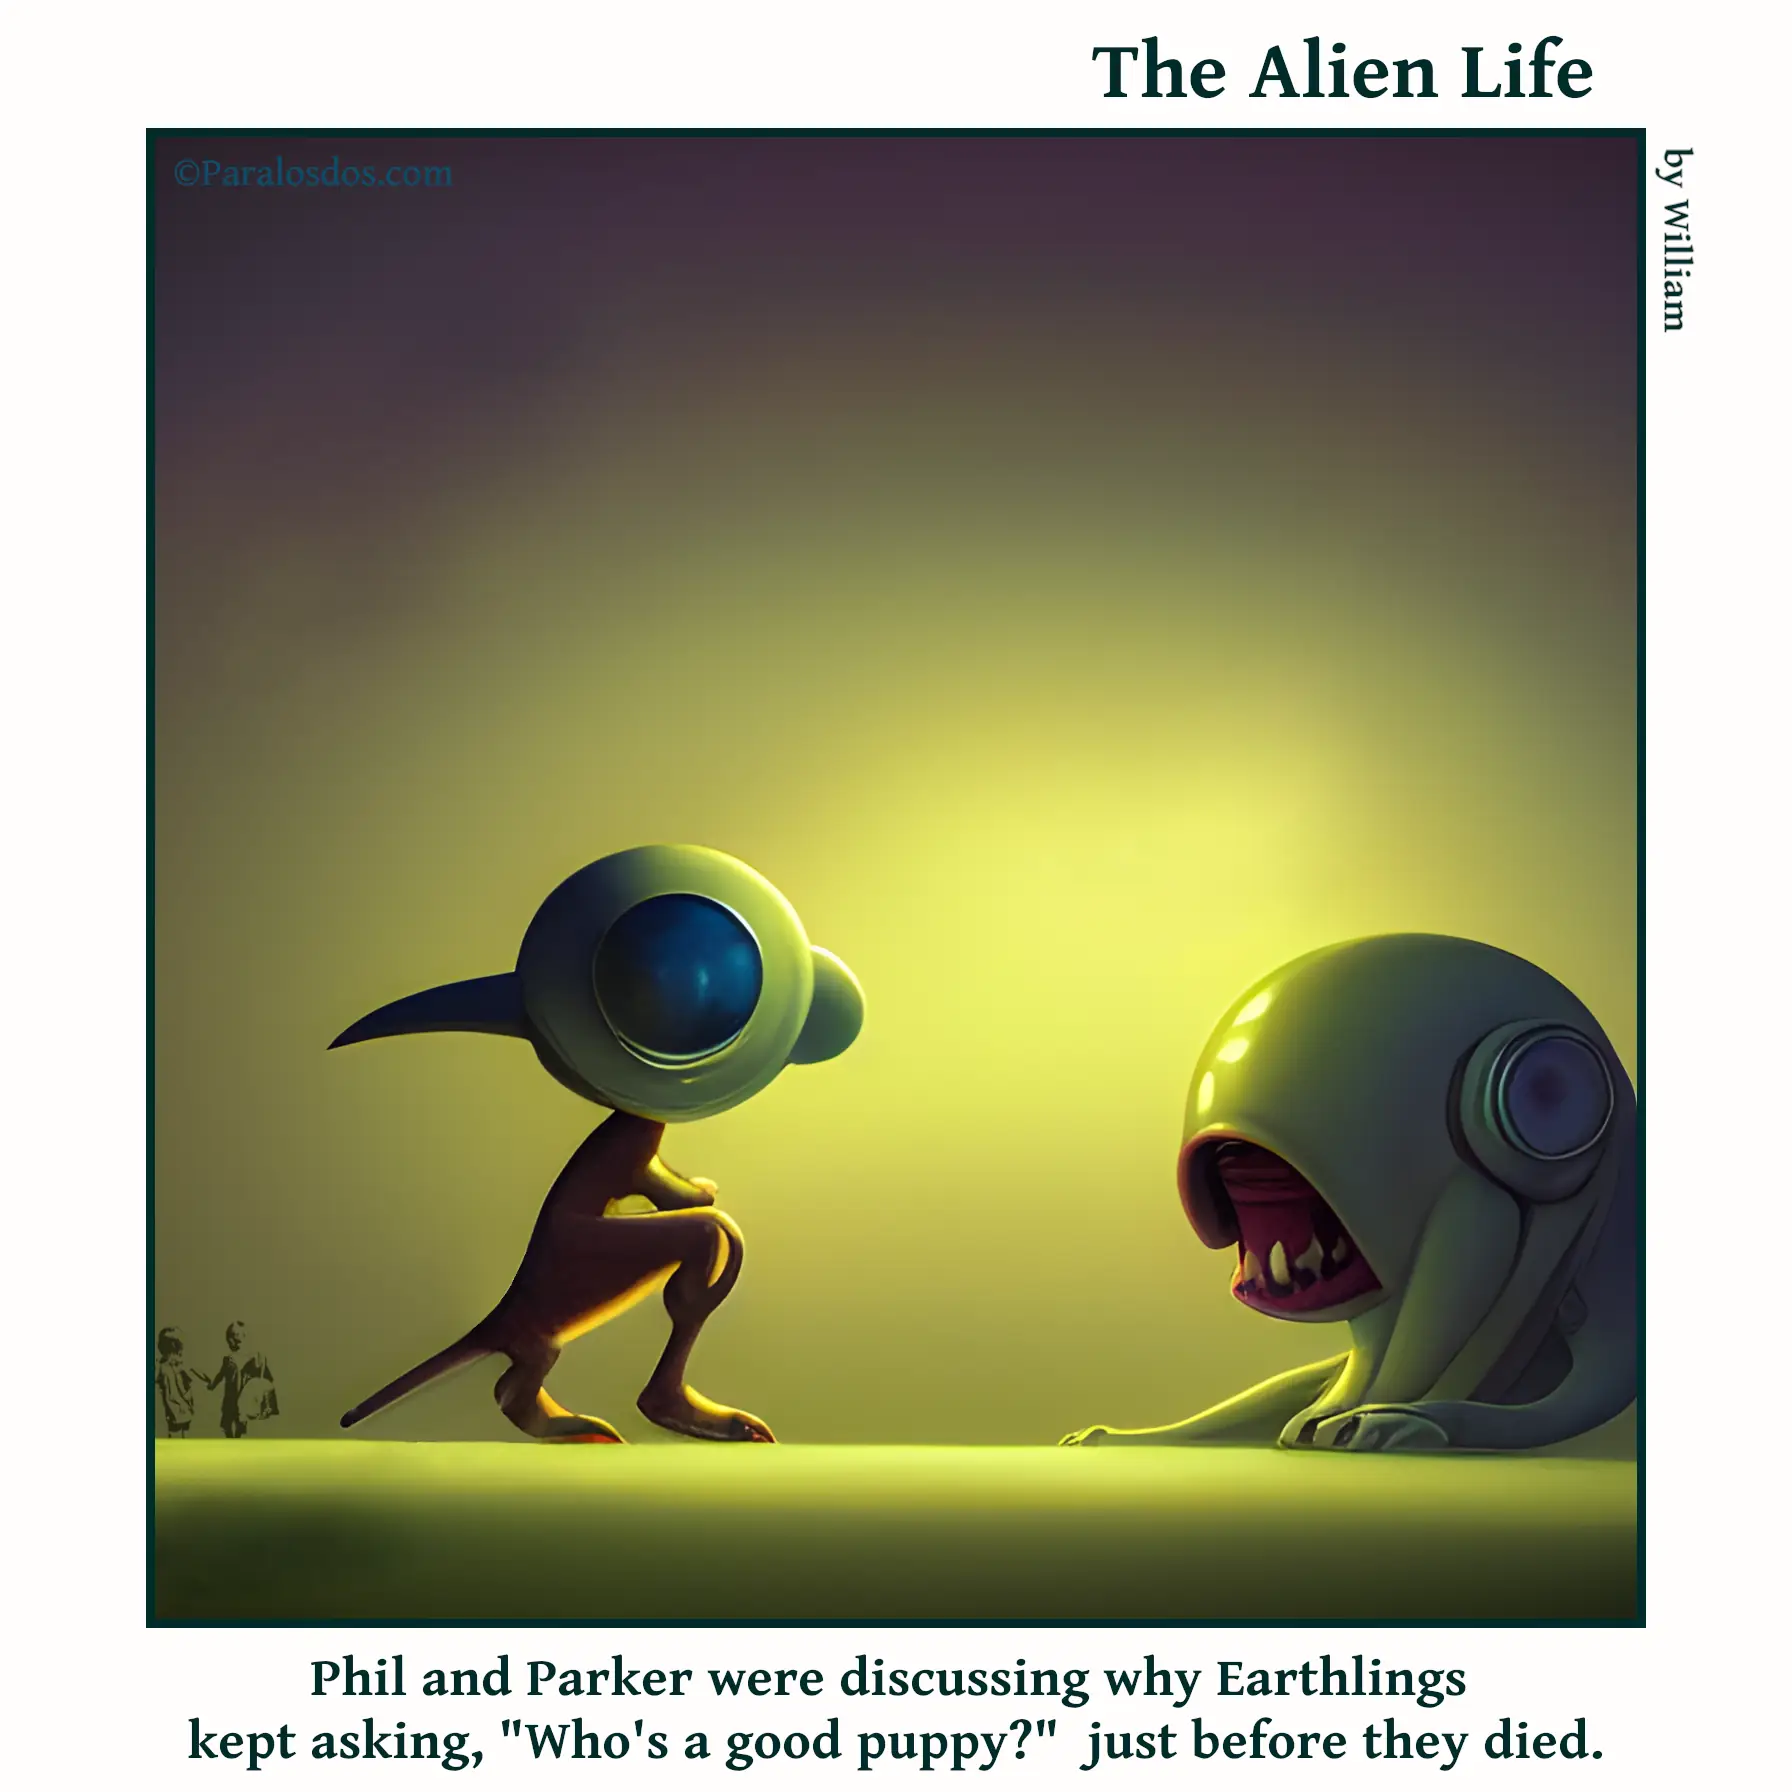 The Alien Life, one panel Comic. Two aliens that look vaguely like dogs are chatting. The caption reads: Phil and Parker were discussing why Earthlings kept asking, "Who's a good puppy?" just before they died.